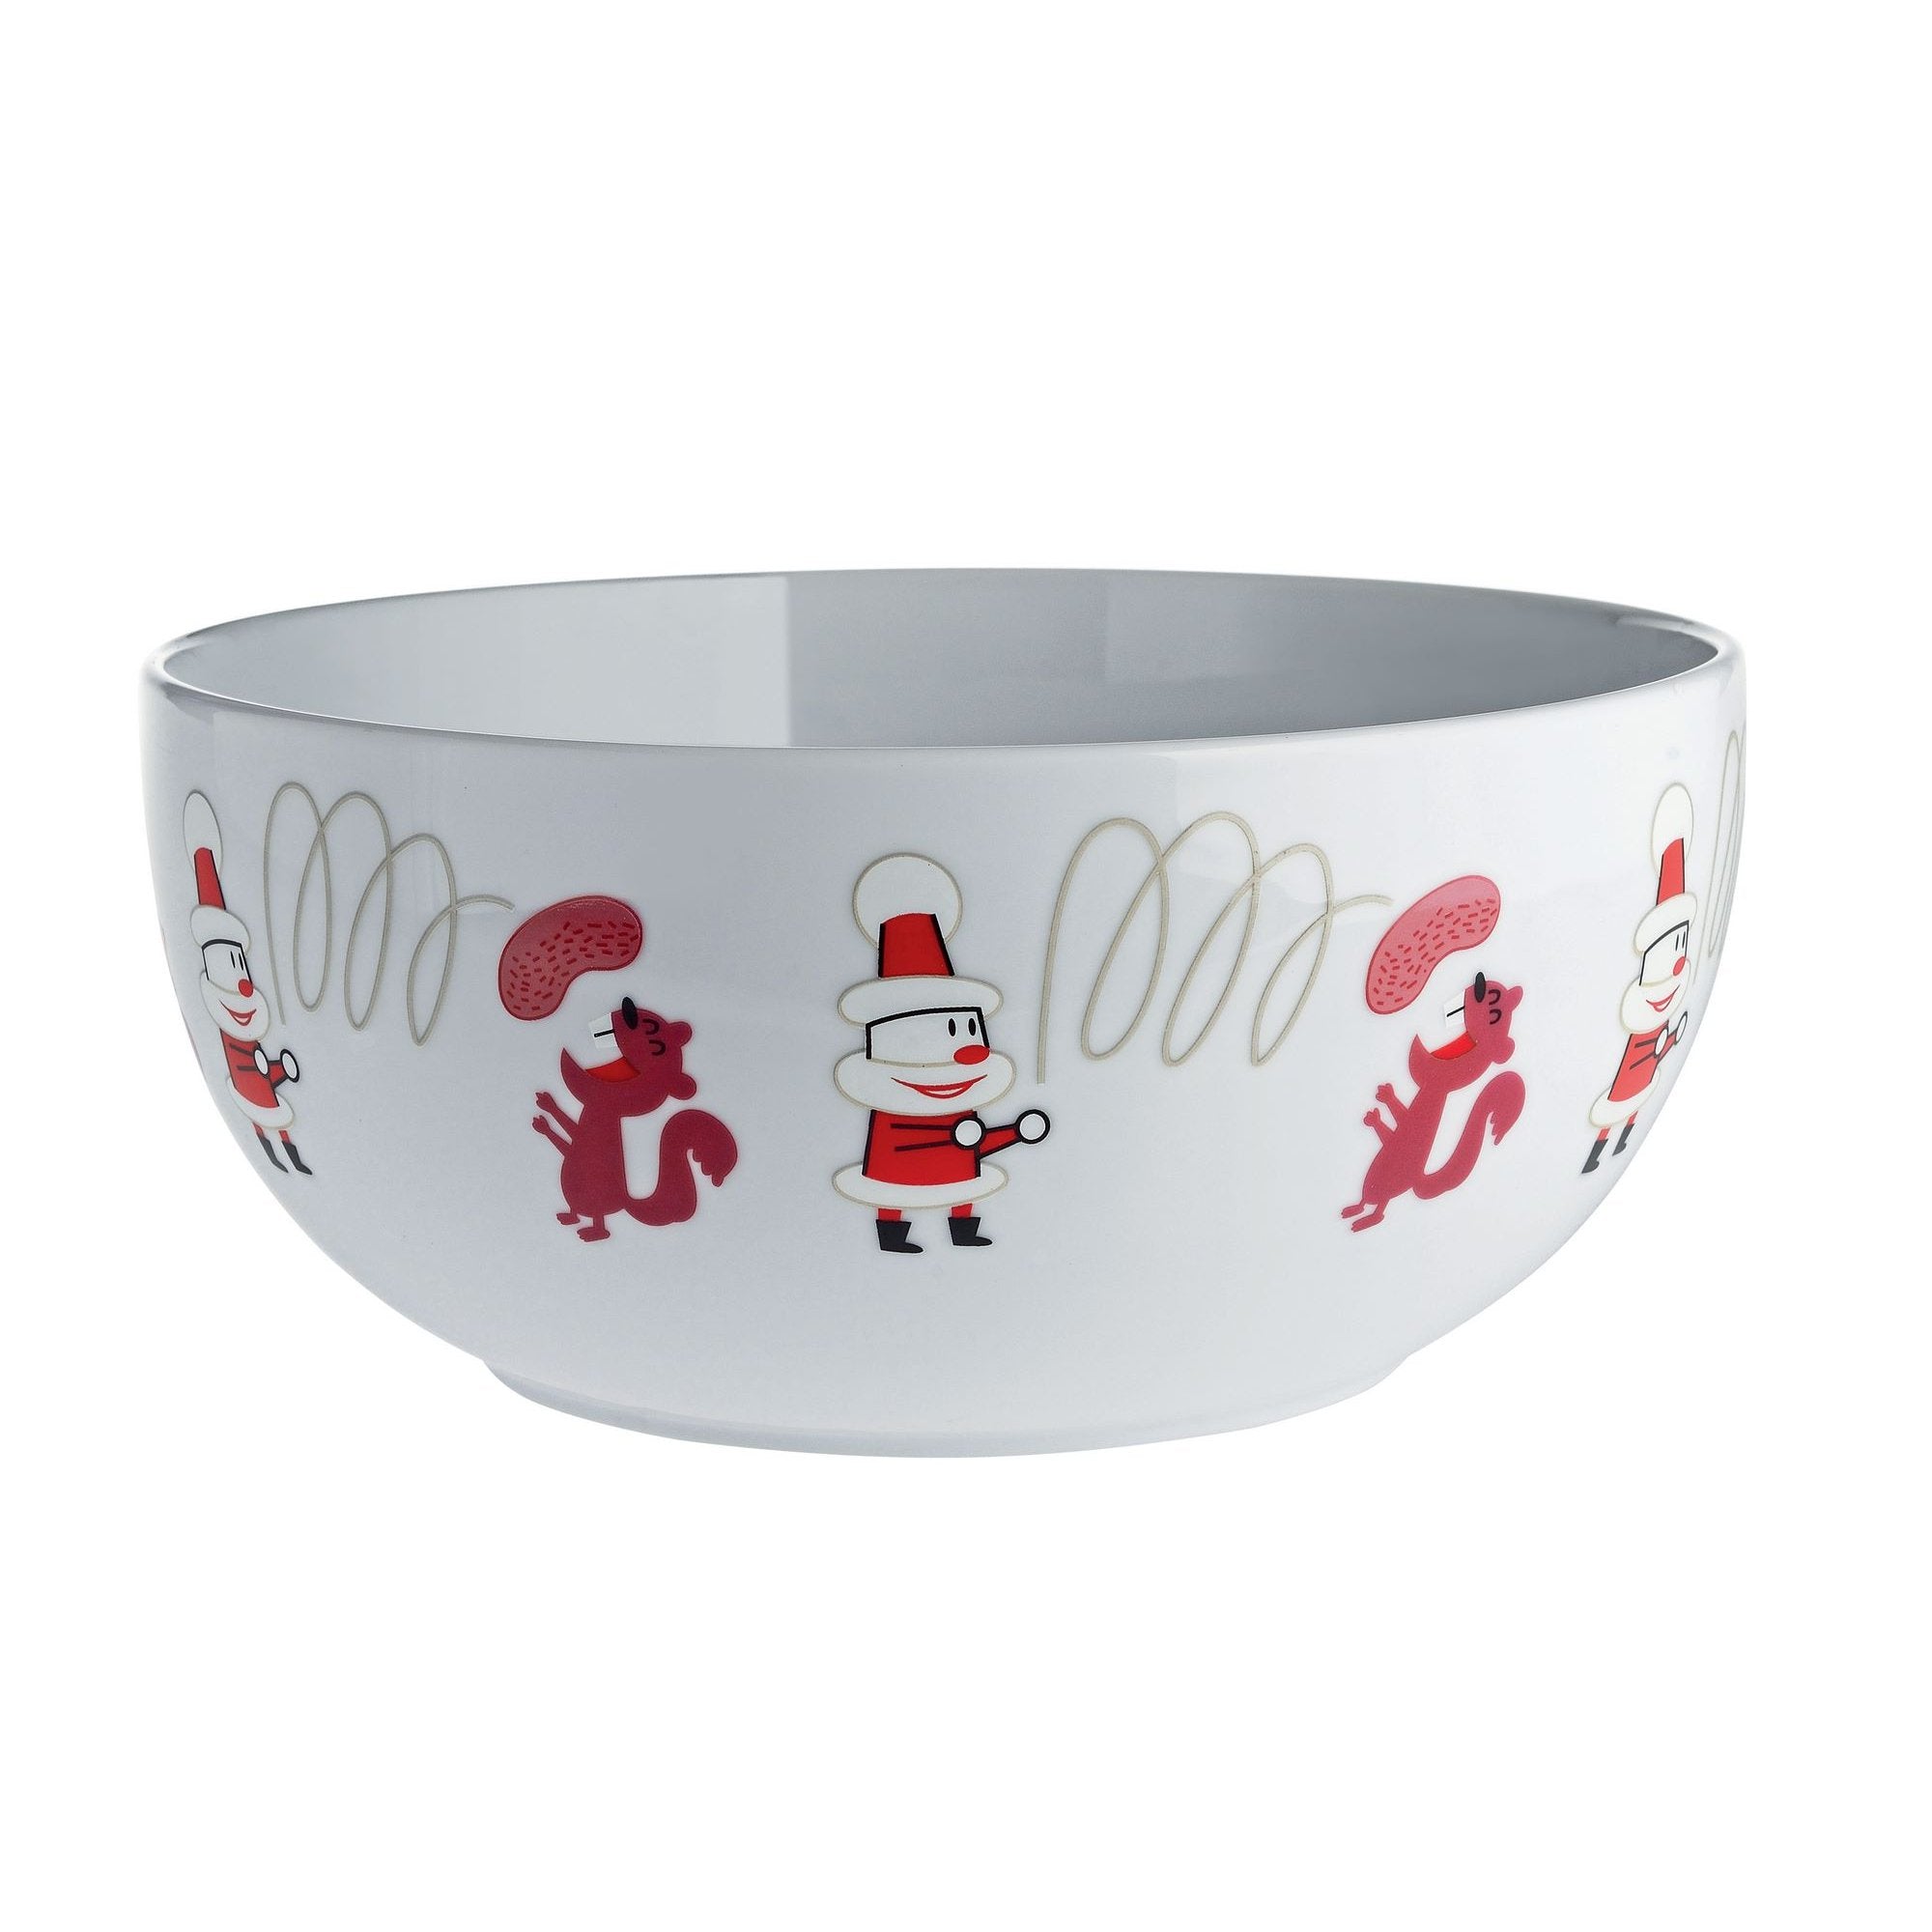 Nut bowl - Get nuts! Christmas